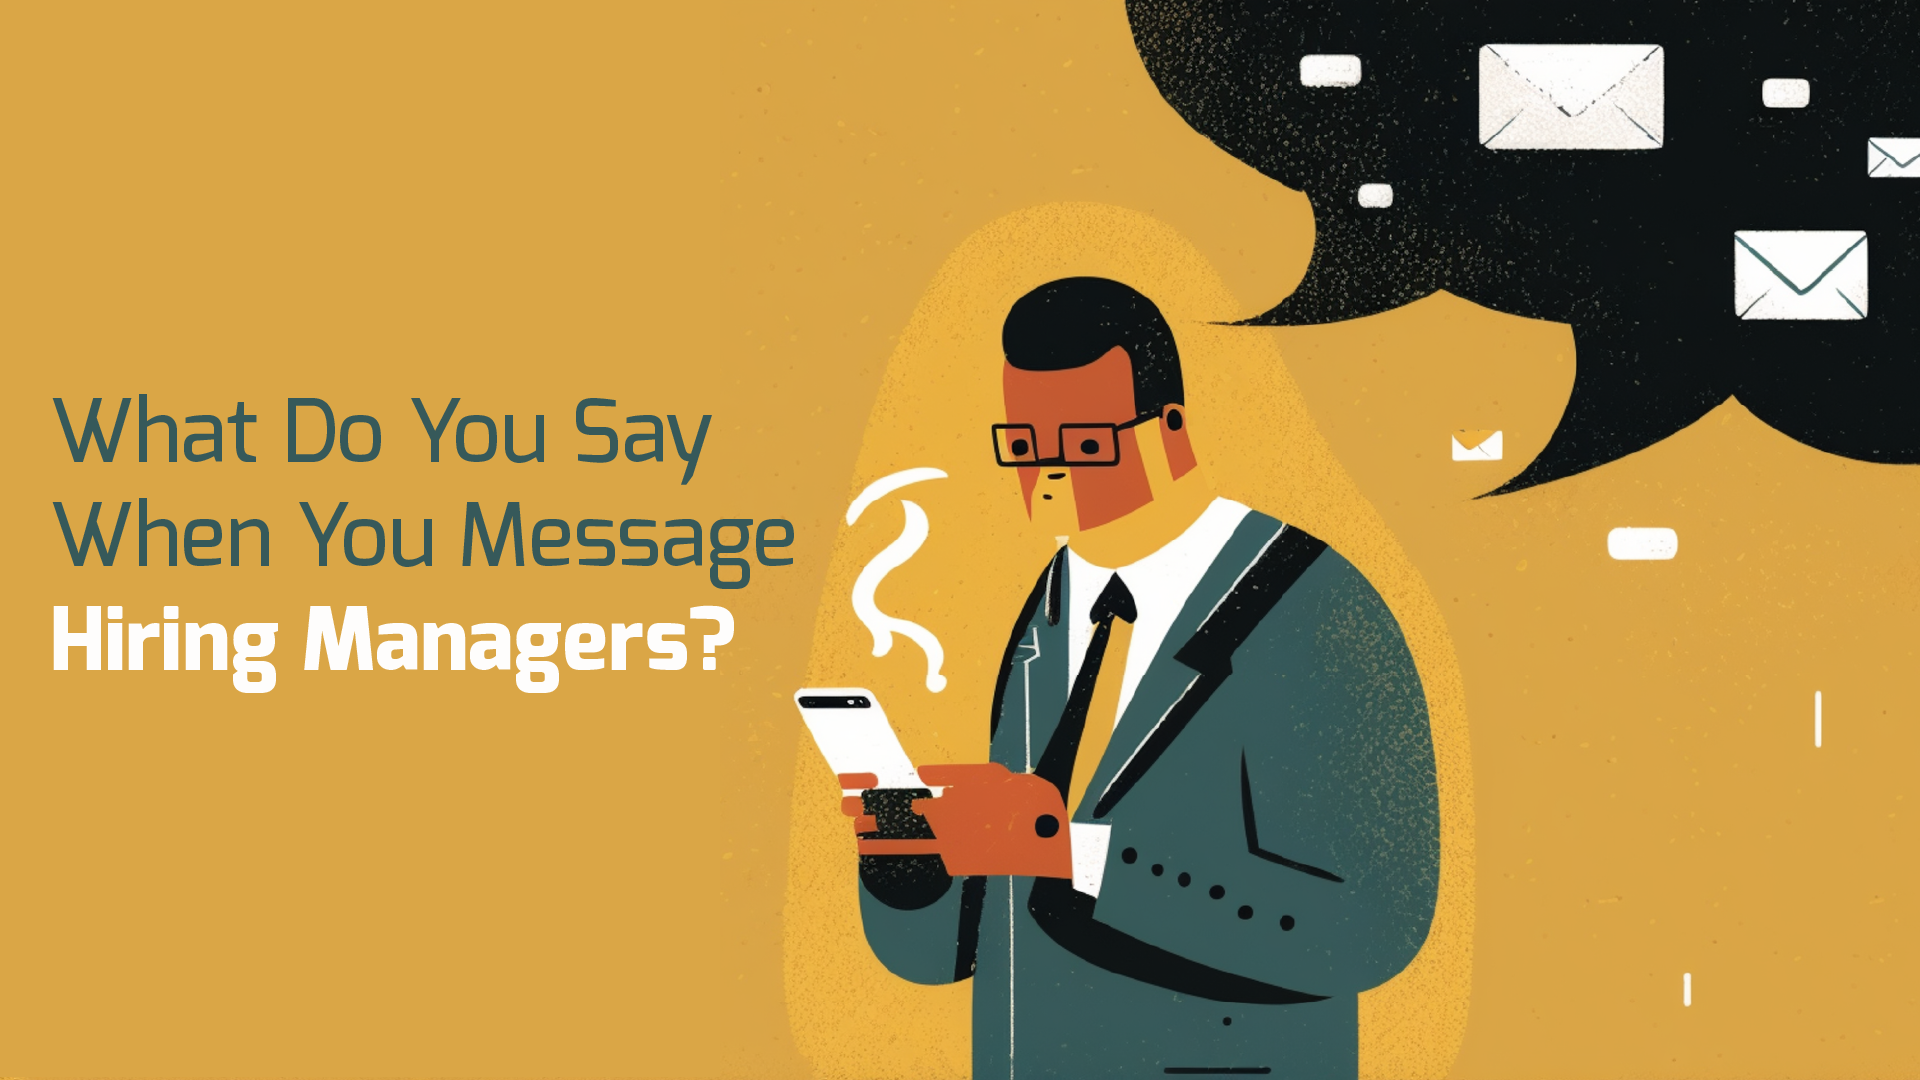 What Do You Say When You Message Hiring Managers?